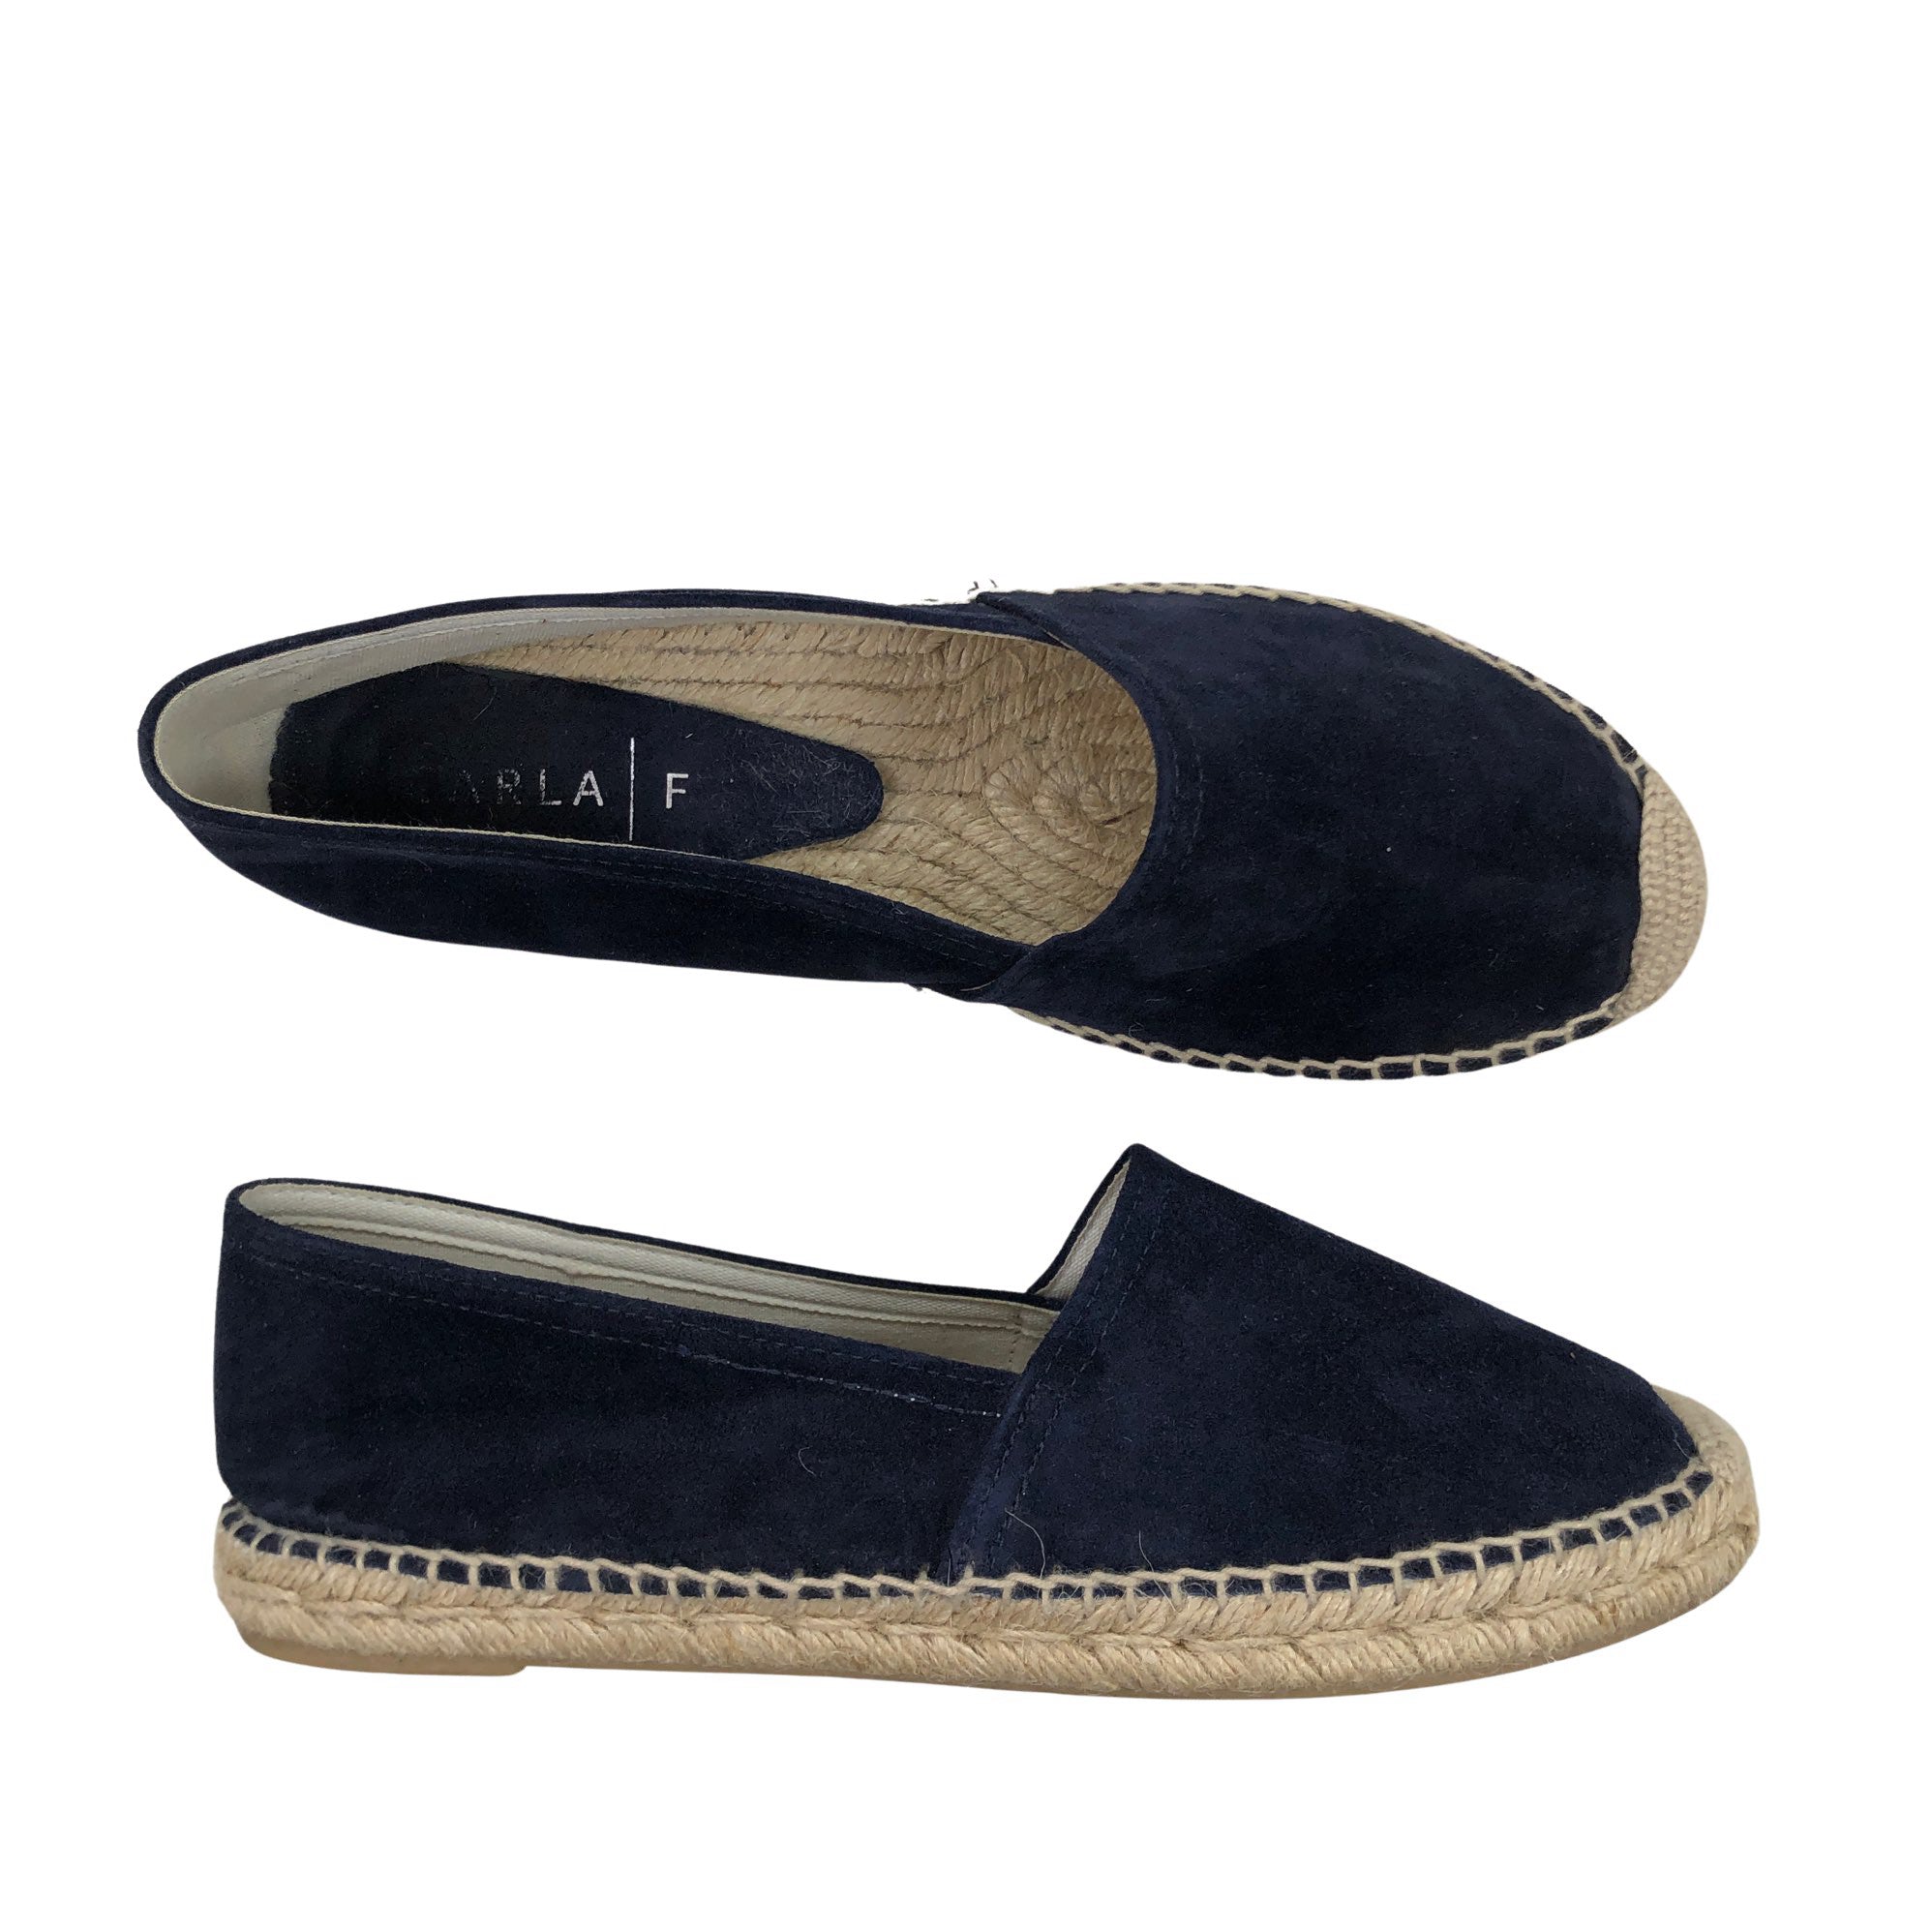 Carla F Loafers – Size 40 – Condition good – (/) - Emmy